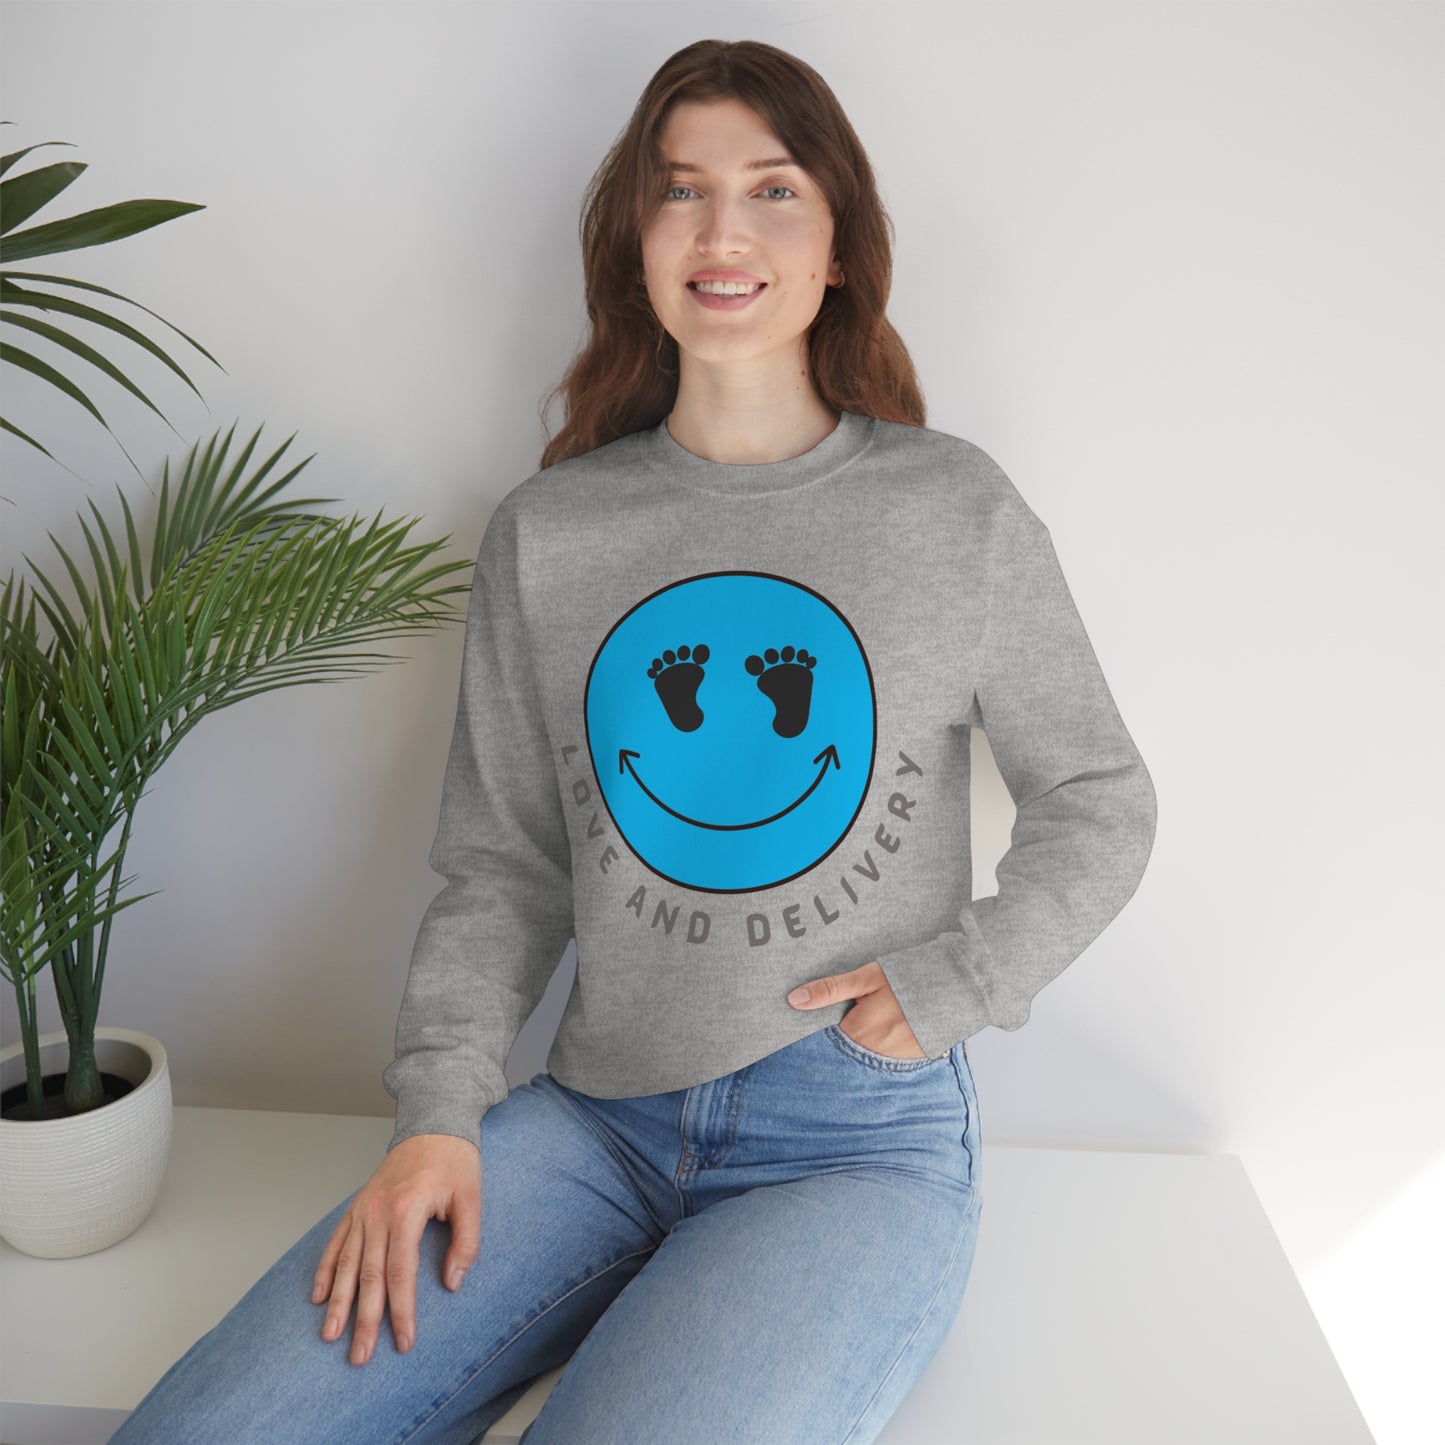 UNISEX  LOVE AND DELIVERY CREWNECK SWEATSHIRT GIFT FOR L AND D NURSES